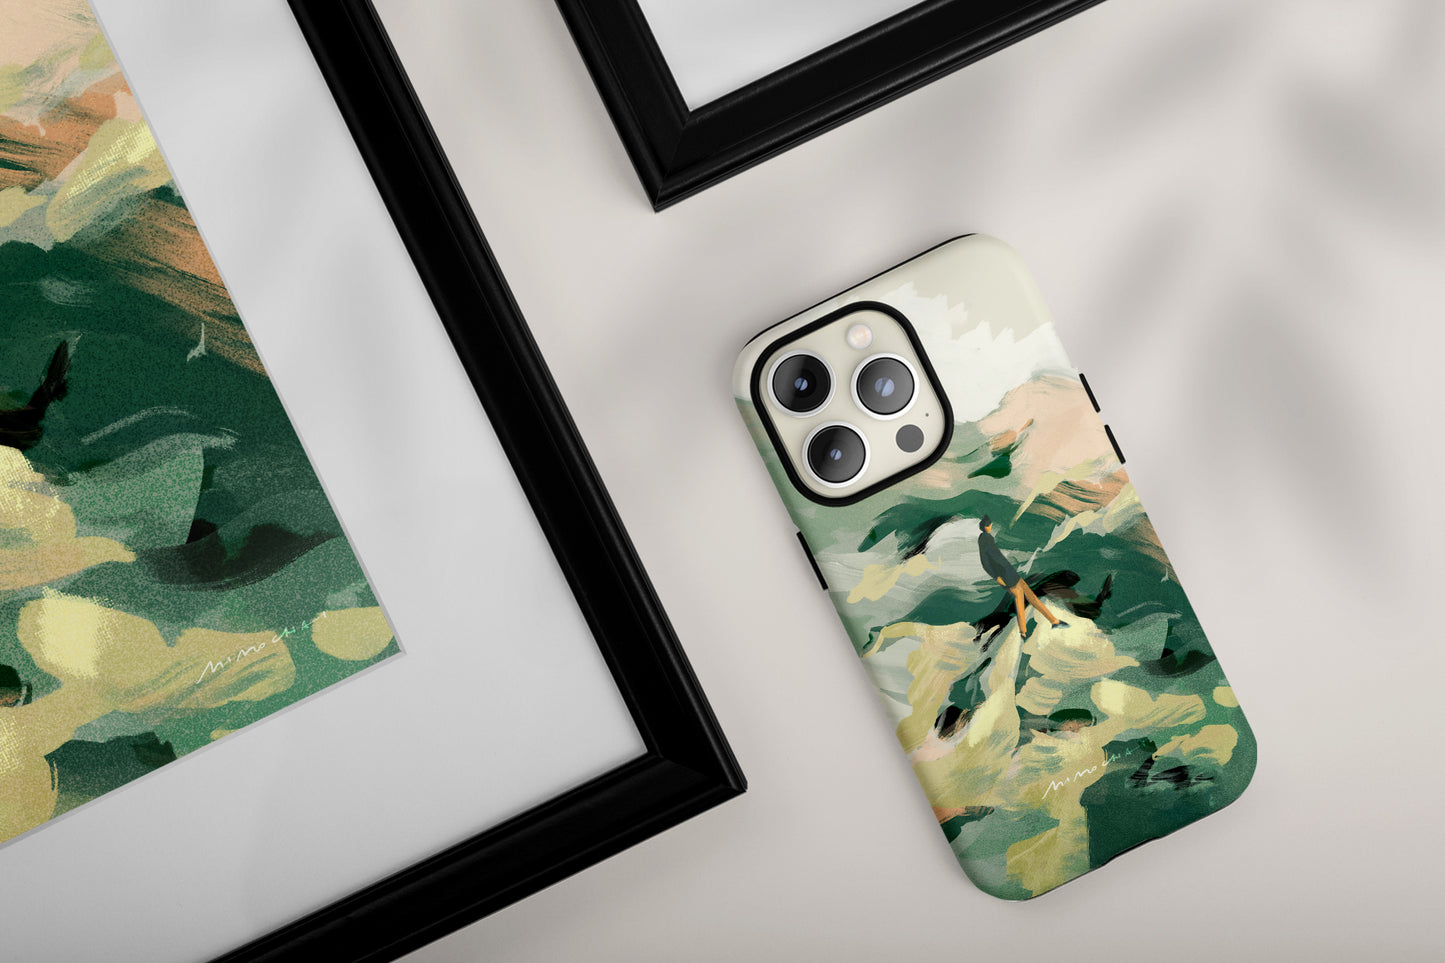 Moving Mountains | Art Phone Case